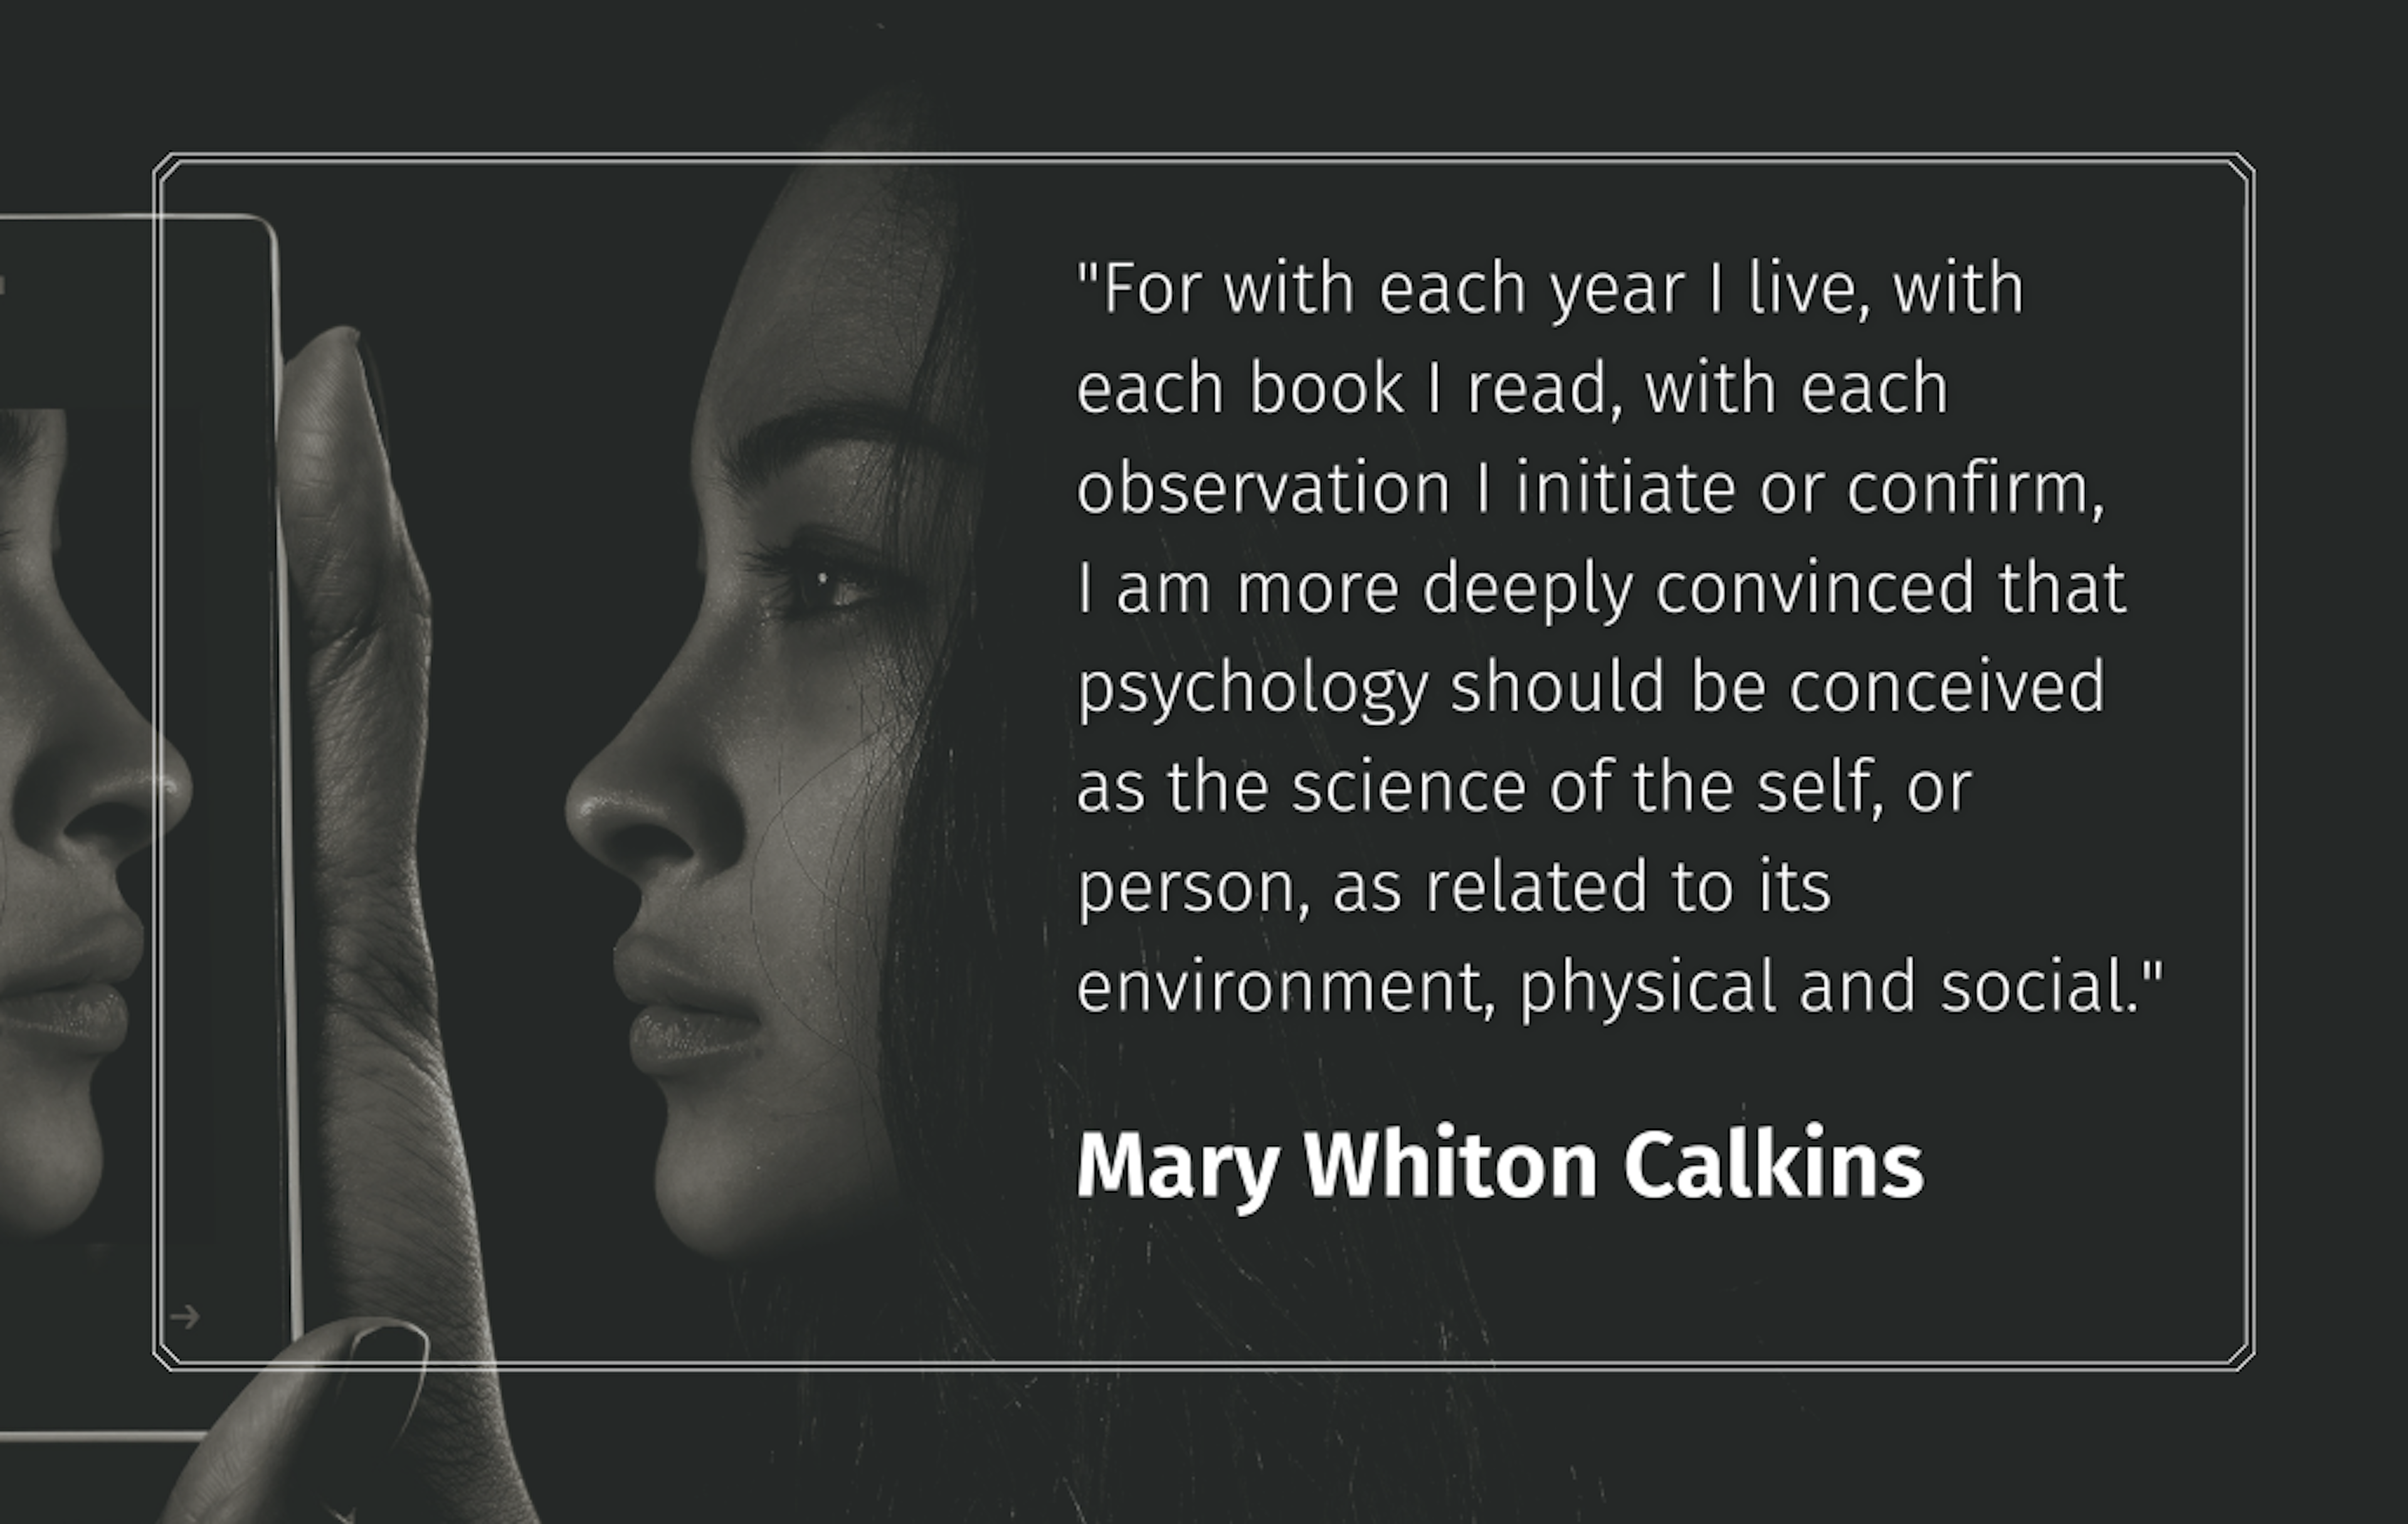 Quote: "For with each year I live, with each book I read, with each observation I initiate or confirm, I am more deeply convinced that psychology should be conceived as the science of the self, or person, as related to its.... Mary Whiton Calkins